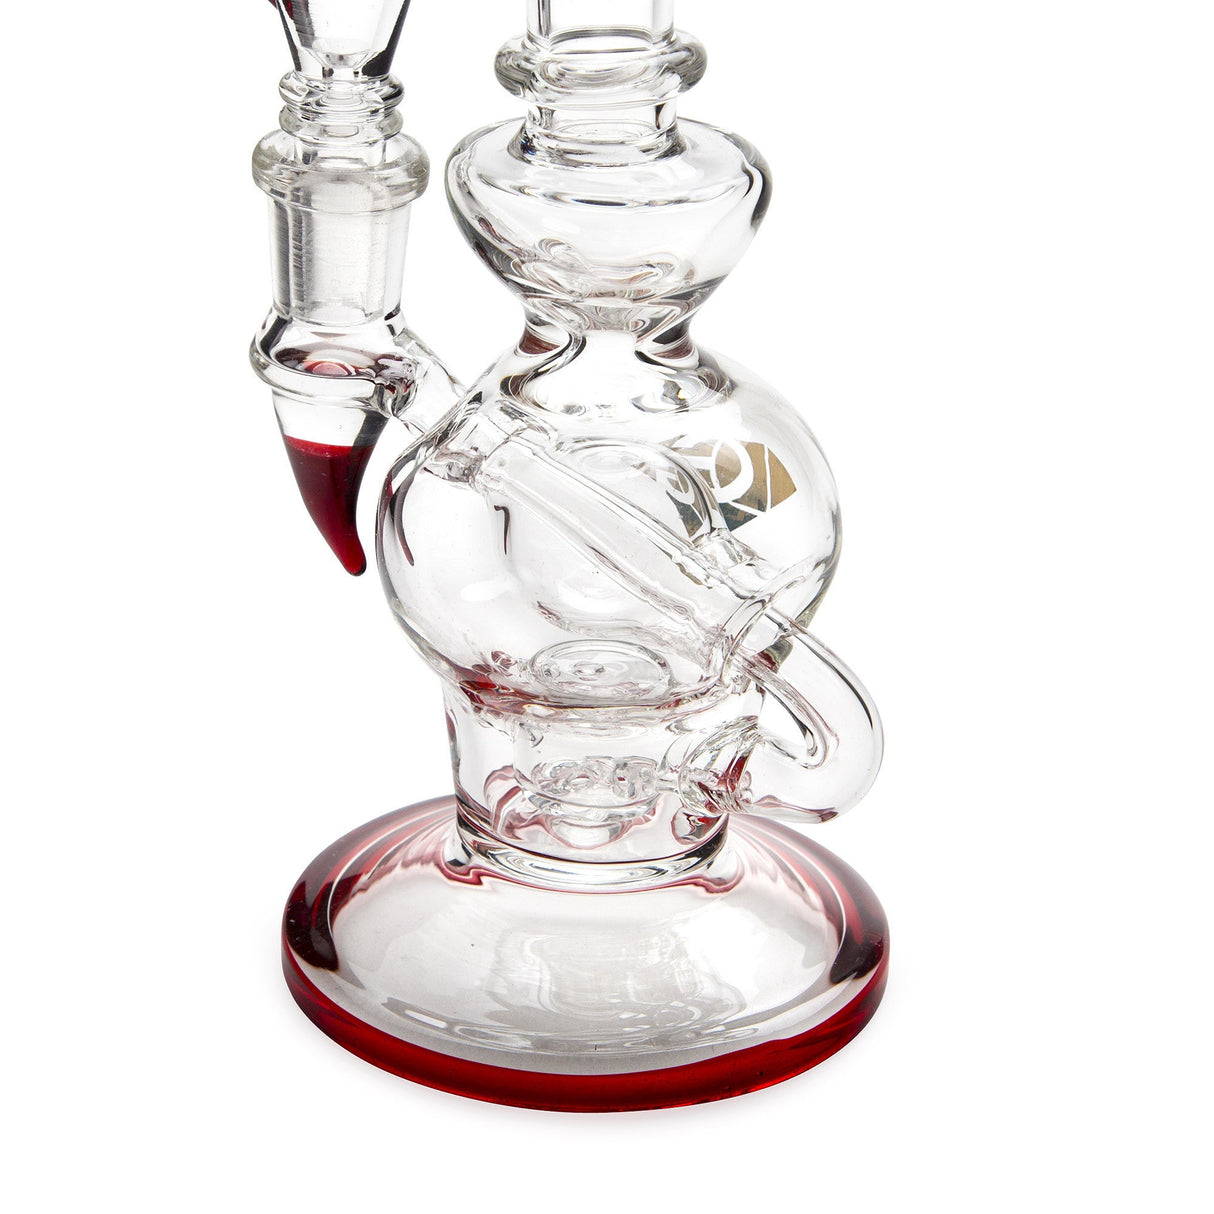 Diamond Glass Talon 7.5" Dab Rig with Barrel Perc & Poker Spike, Front View on White Background